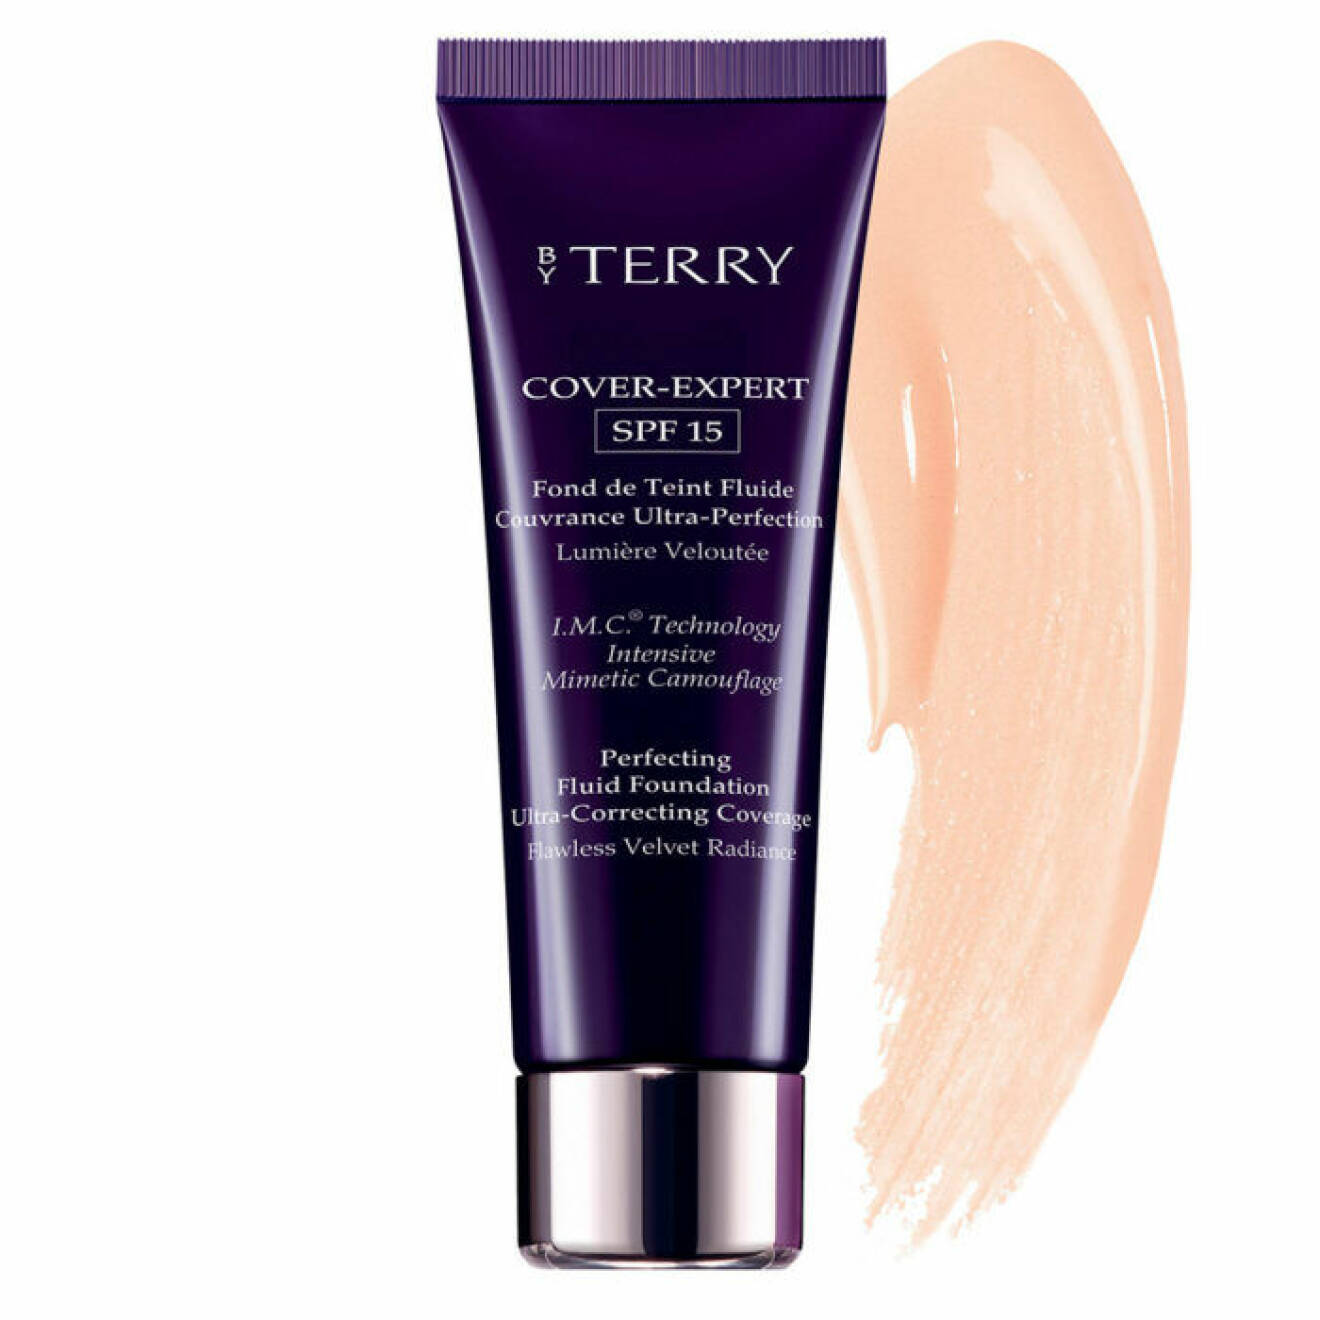 By Terry foundation med spf